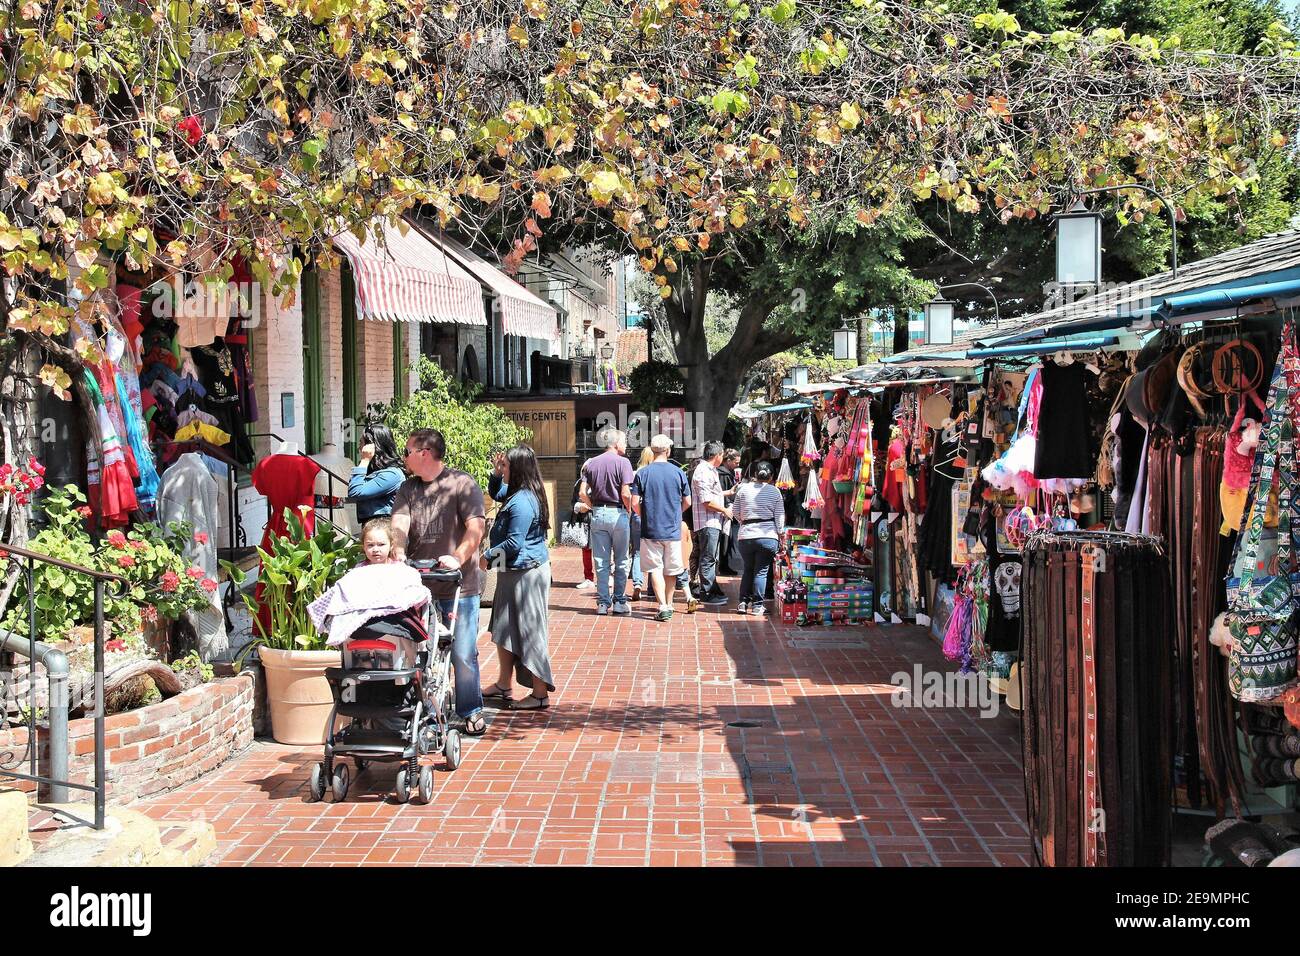 LOS ANGELES, USA - APRIL 5, 2014: People visit Olvera Street market in Los Angeles. Olvera Street is the oldest part of downtown LA. It is California Stock Photo